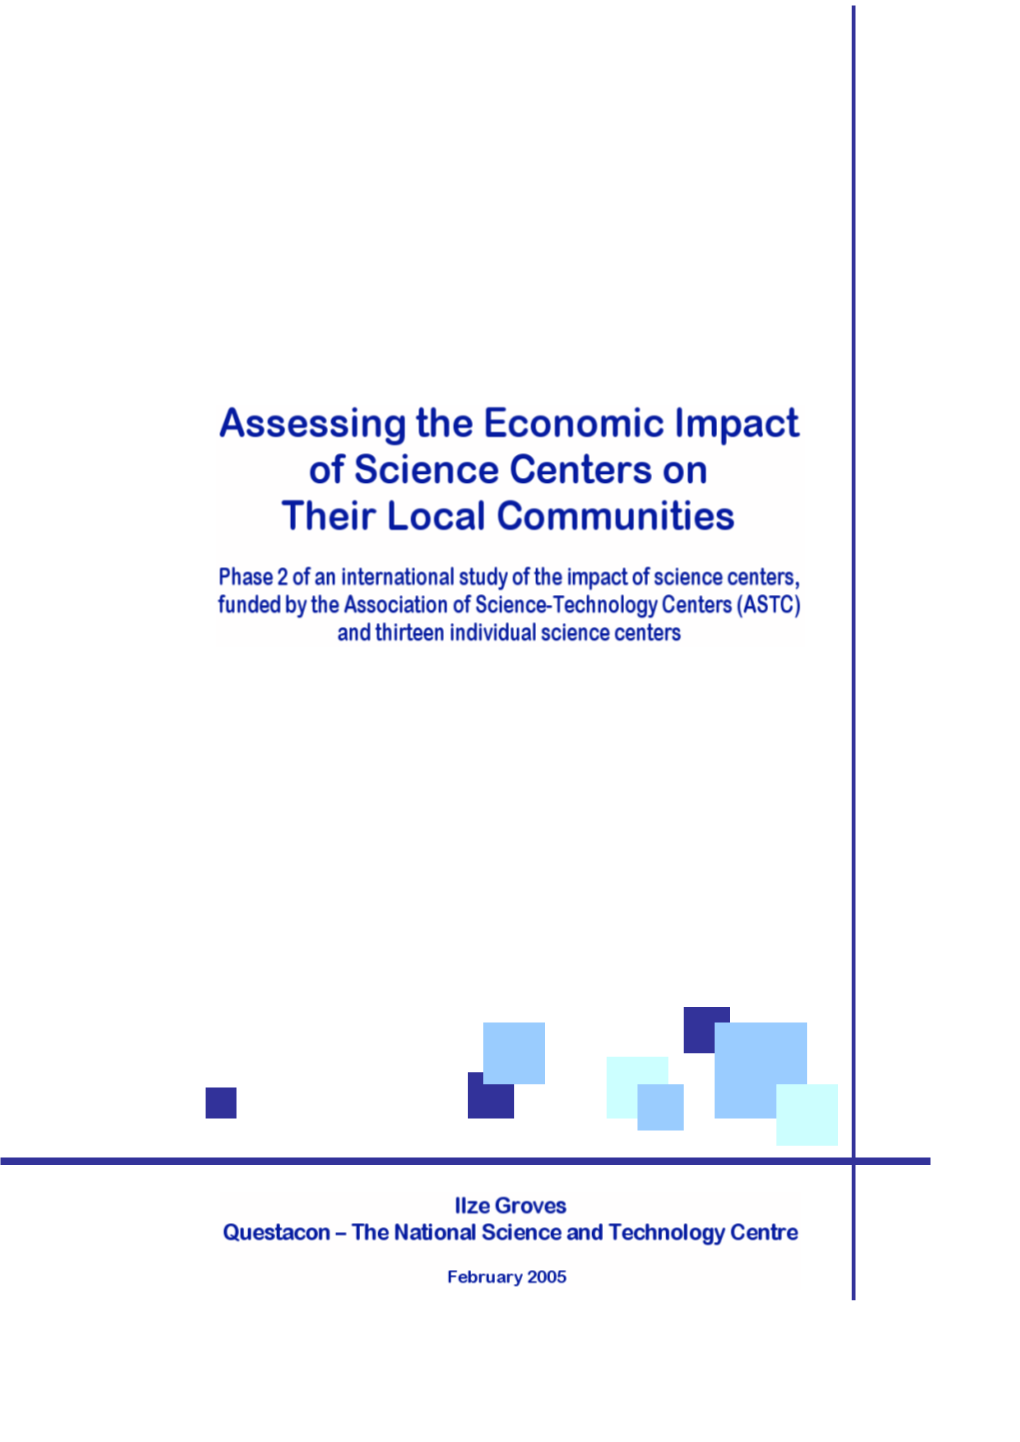 Assessing the Economic Impact of Science Centers on Their Local